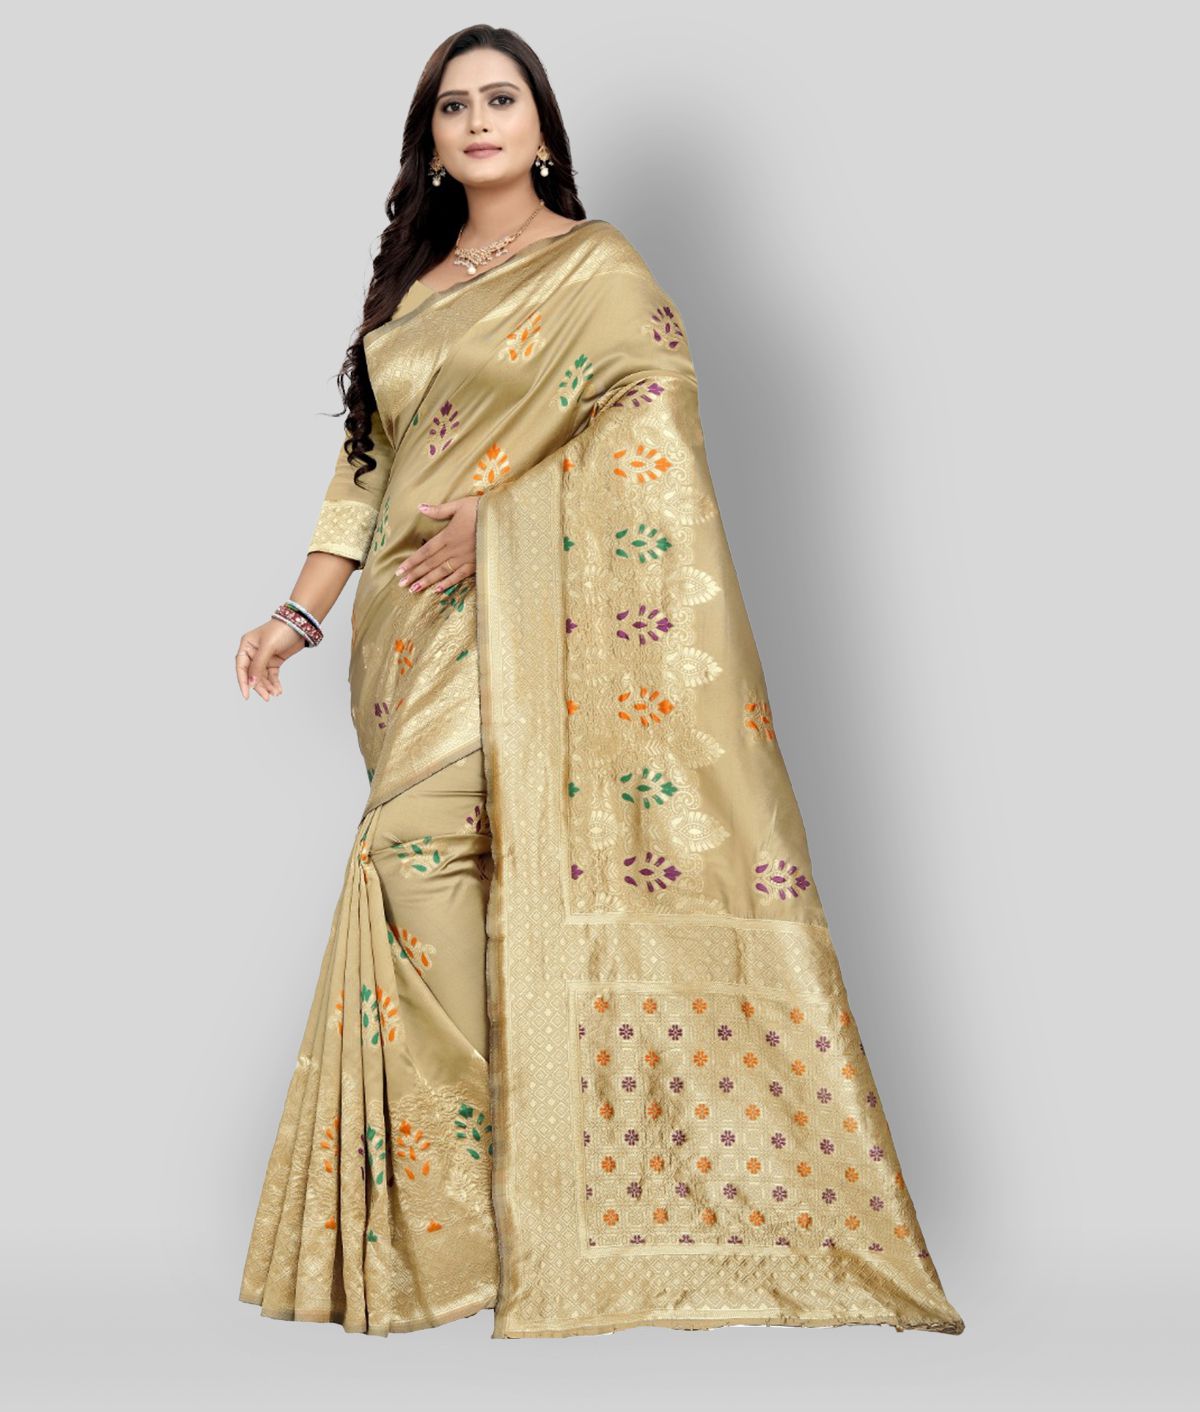     			NENCY FASHIONS - Beige Banarasi Silk Saree With Blouse Piece (Pack of 1)